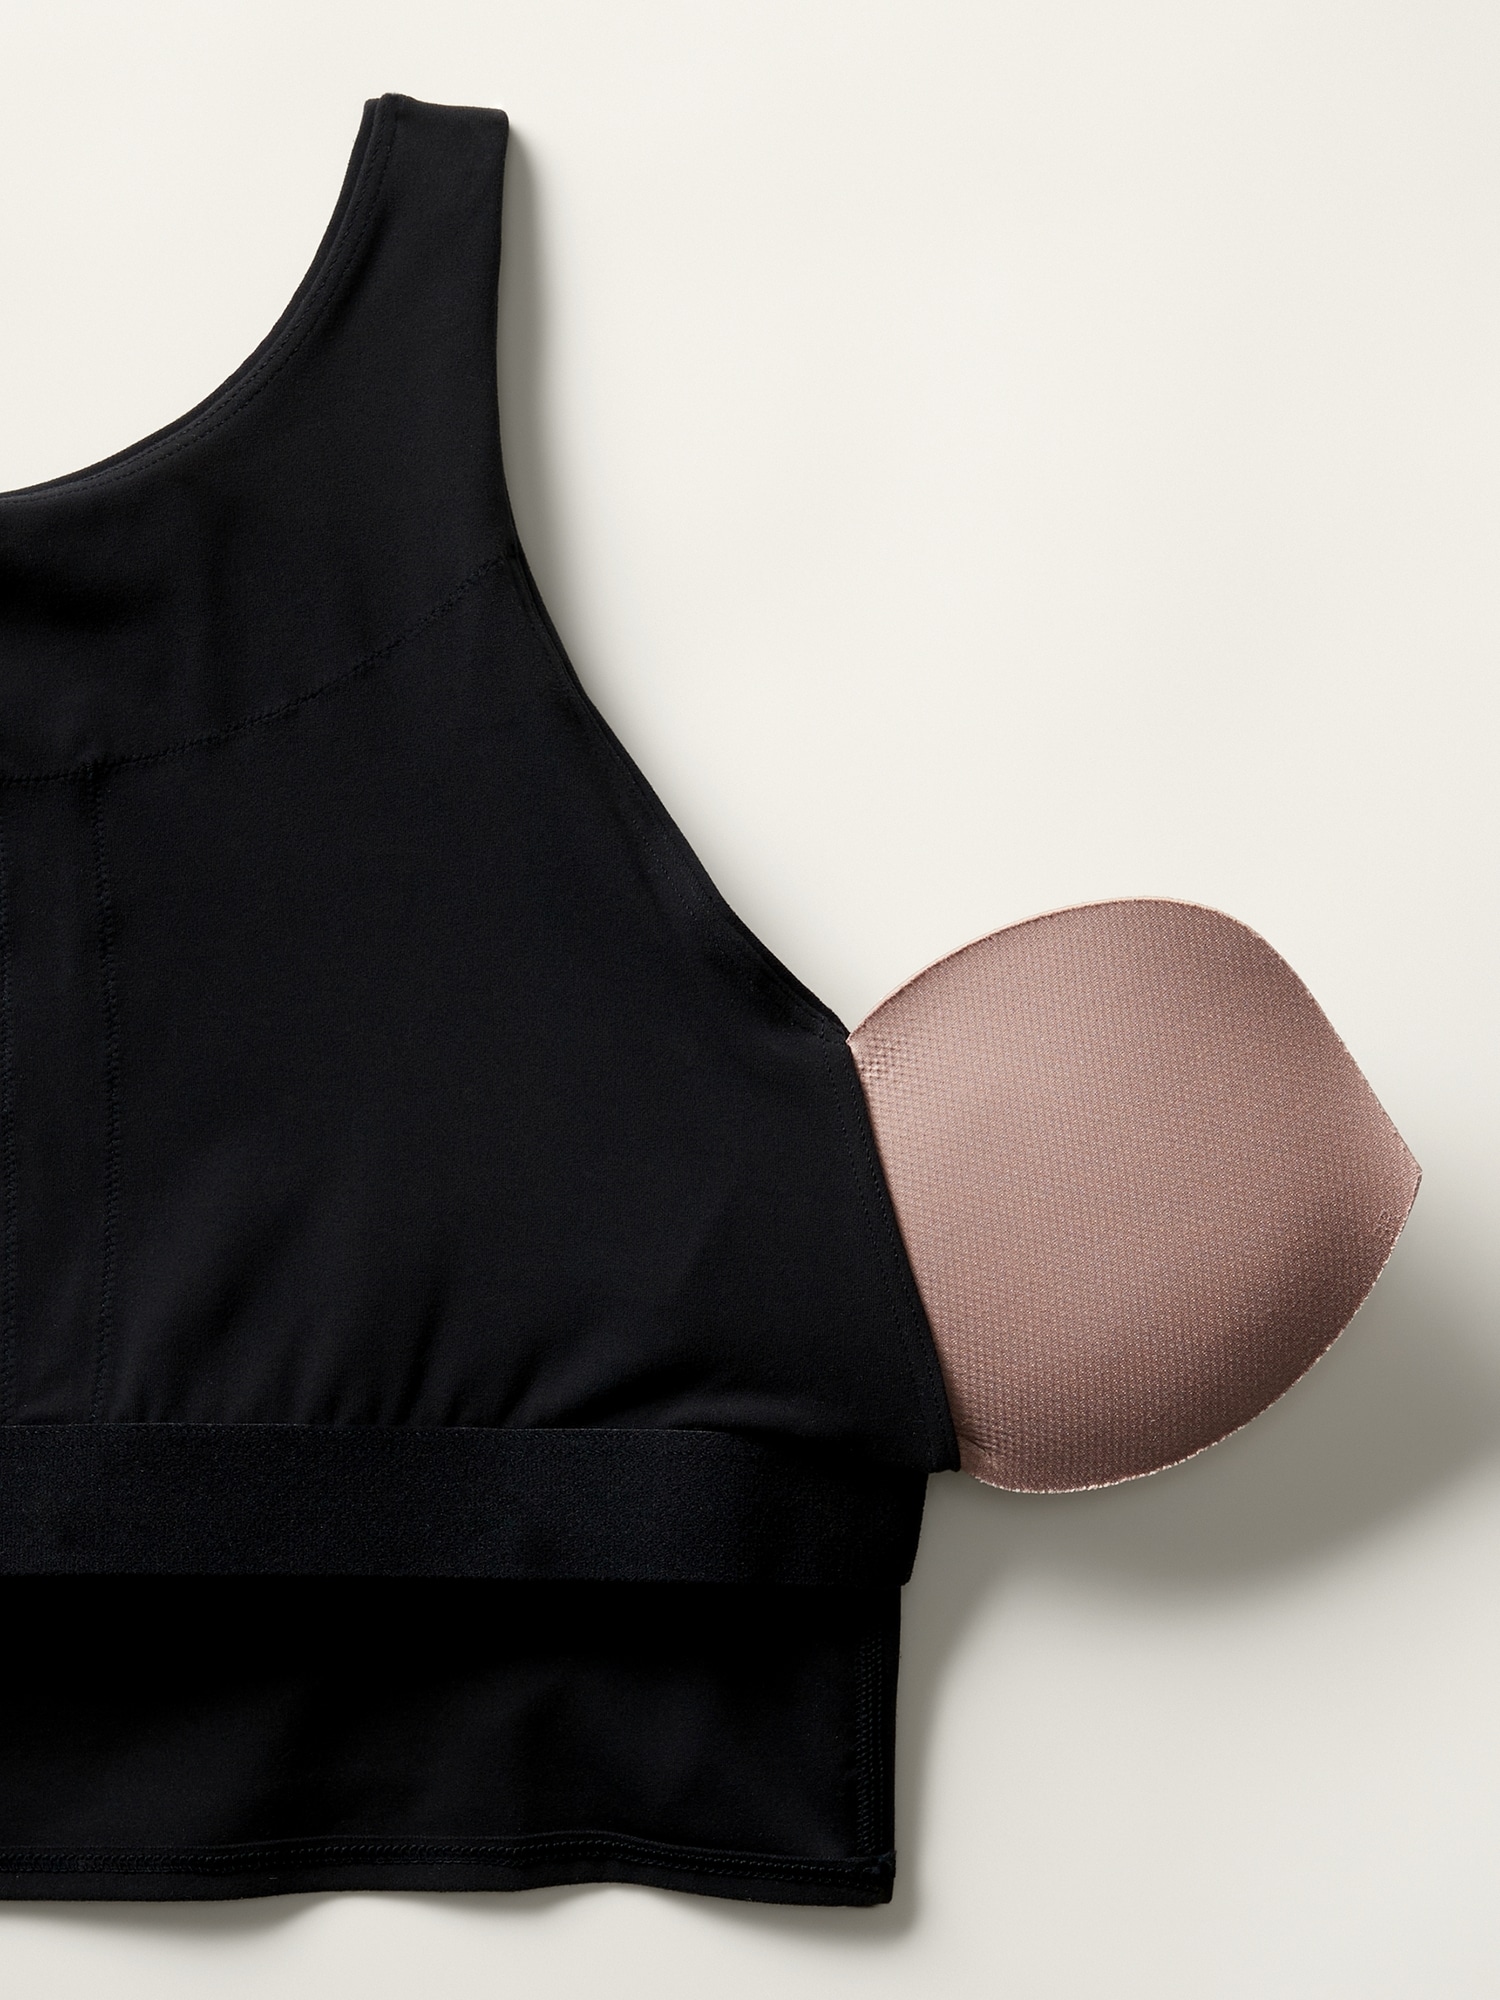 This new post-mastectomy bra patch is empowering